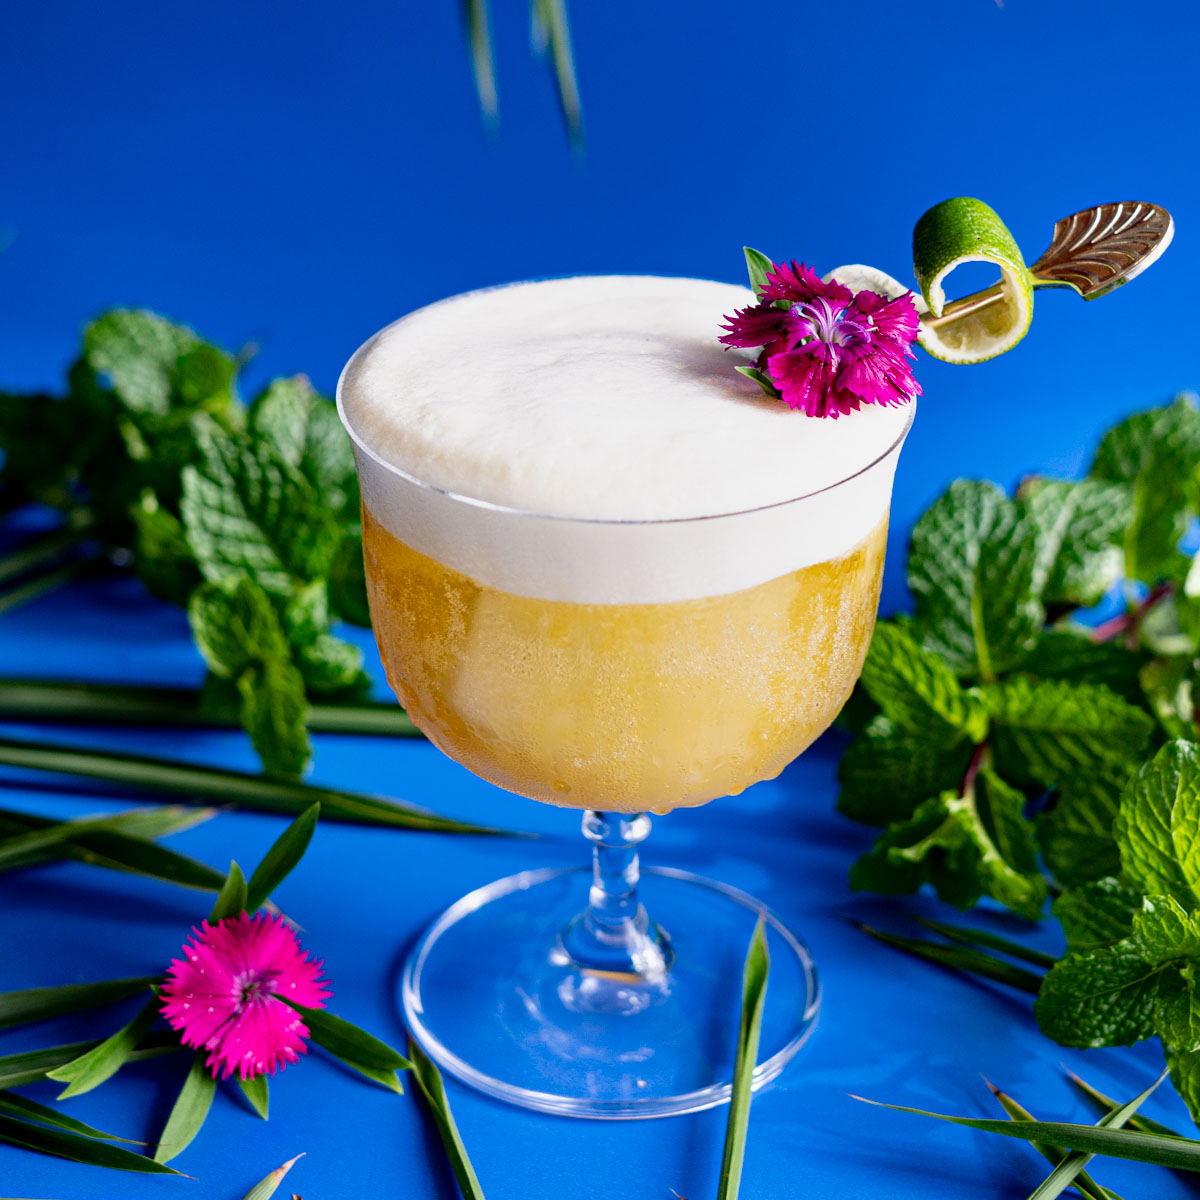 A tropical pineapple cocktail is pictured sitting on a blue background surrounded by mint leaves, bamboo leaves, and a tropical flower. The drink is garnished with a lime peel and a tropical flower.